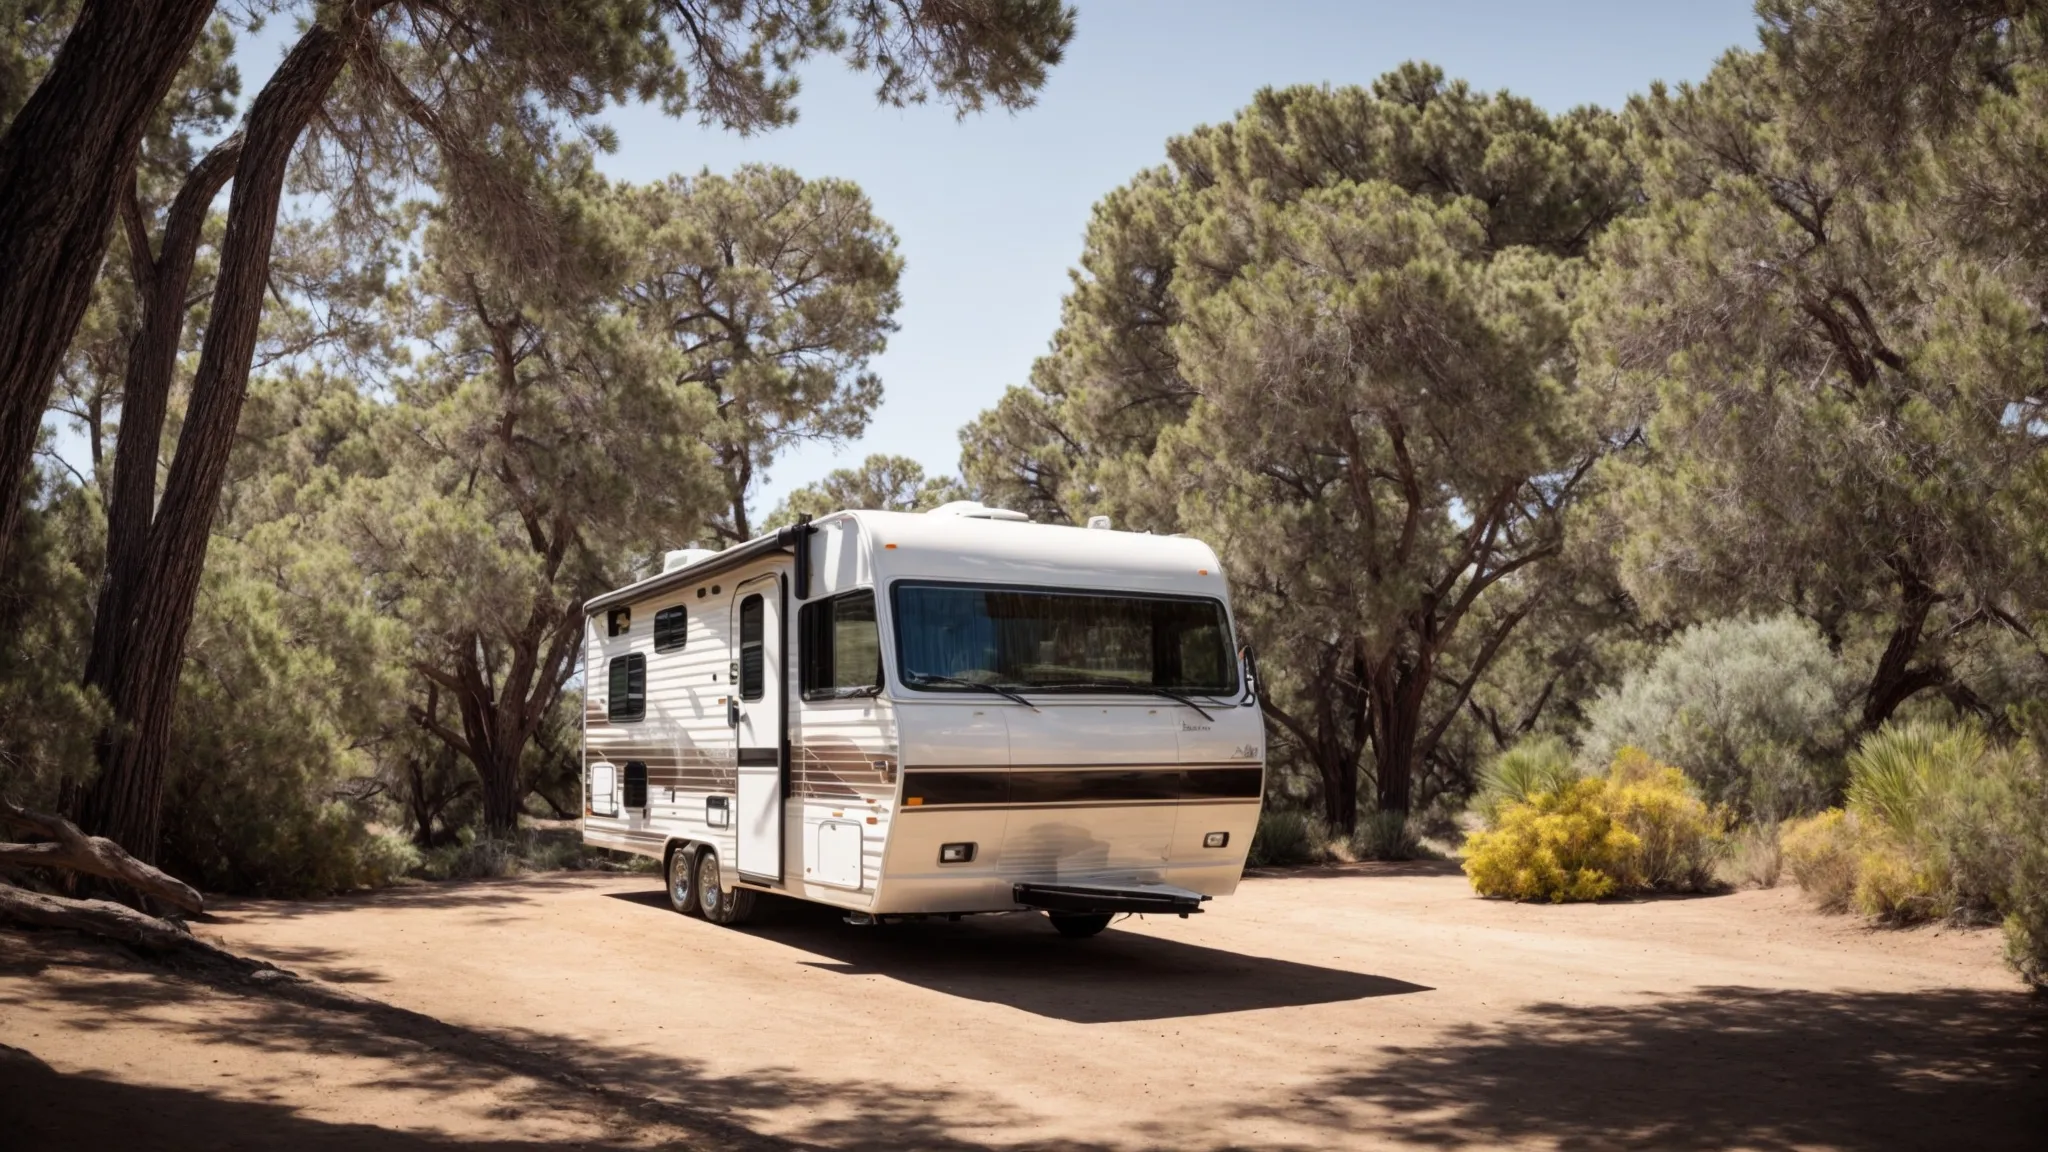 an rv is parked amid peaceful, forested grounds under a clear, bright sky, encapsulating the essence of an idyllic san diego rv park.